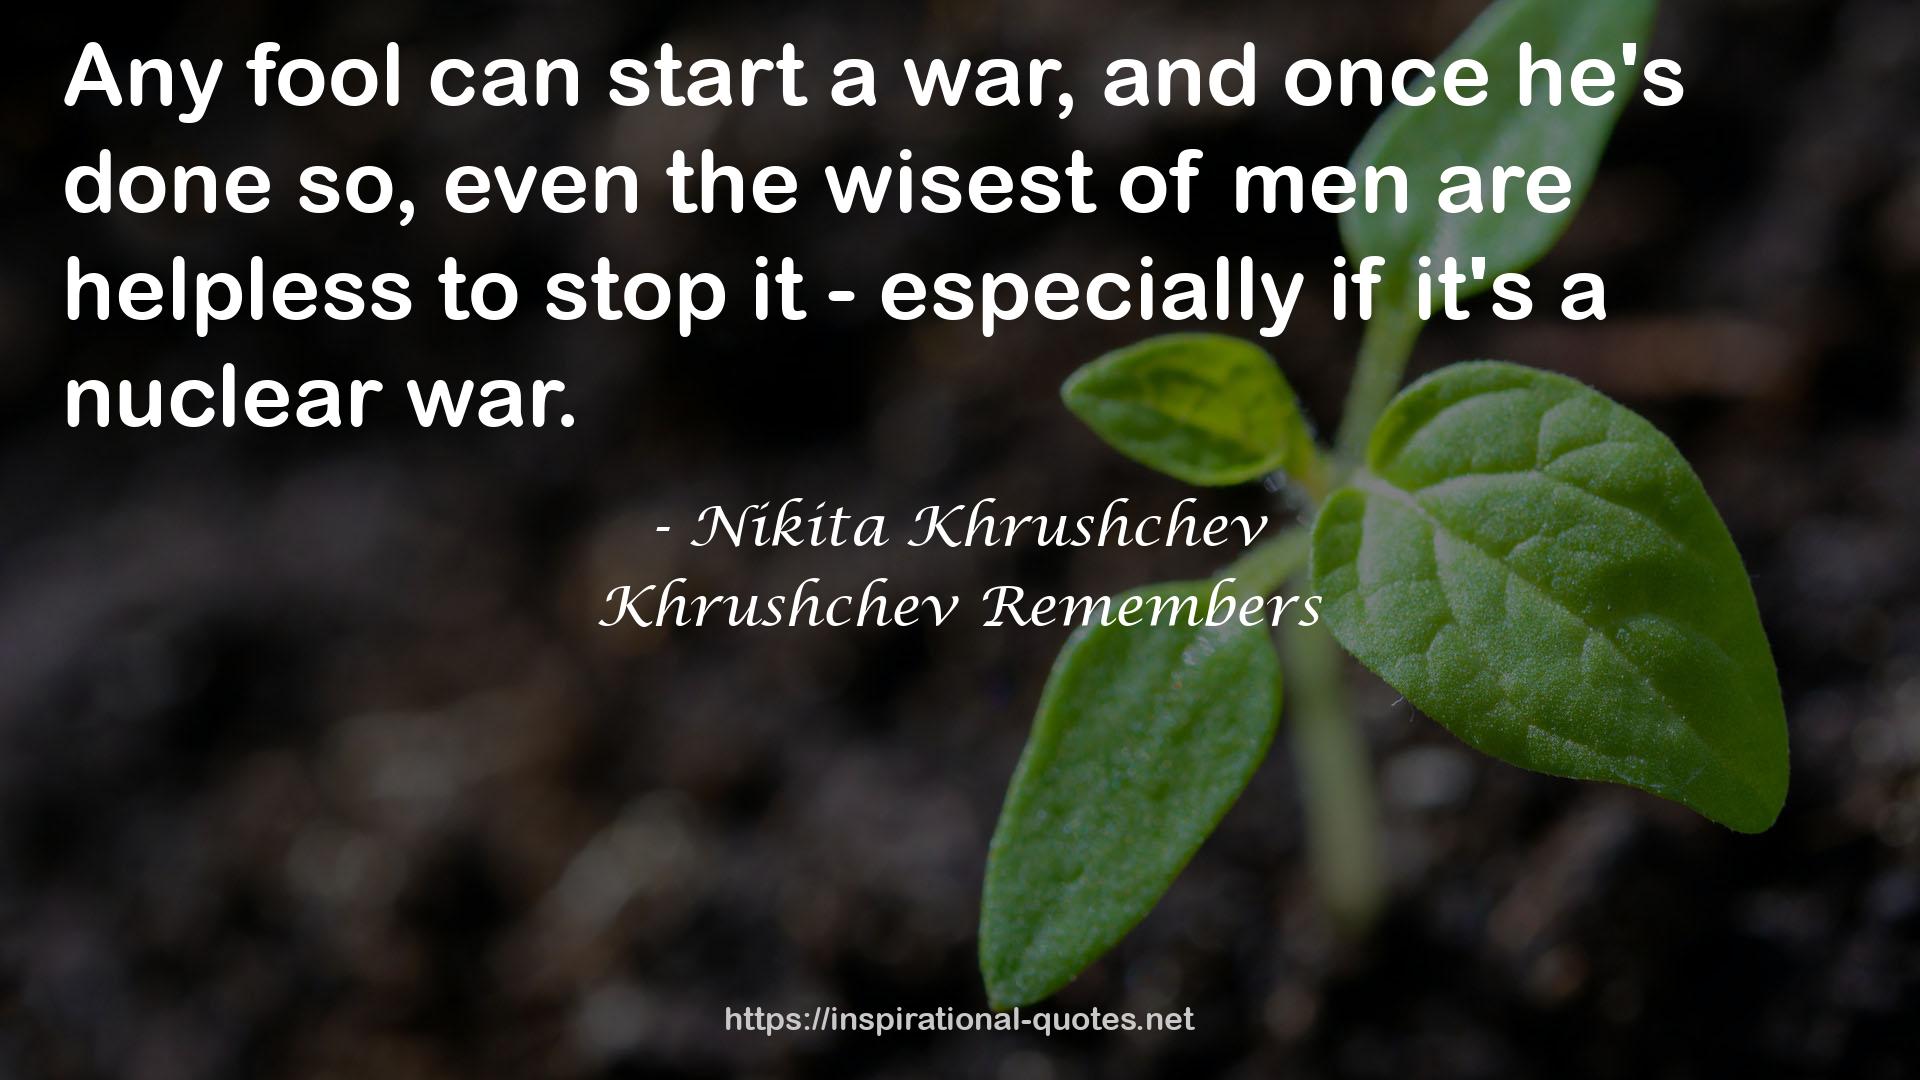 Khrushchev Remembers QUOTES